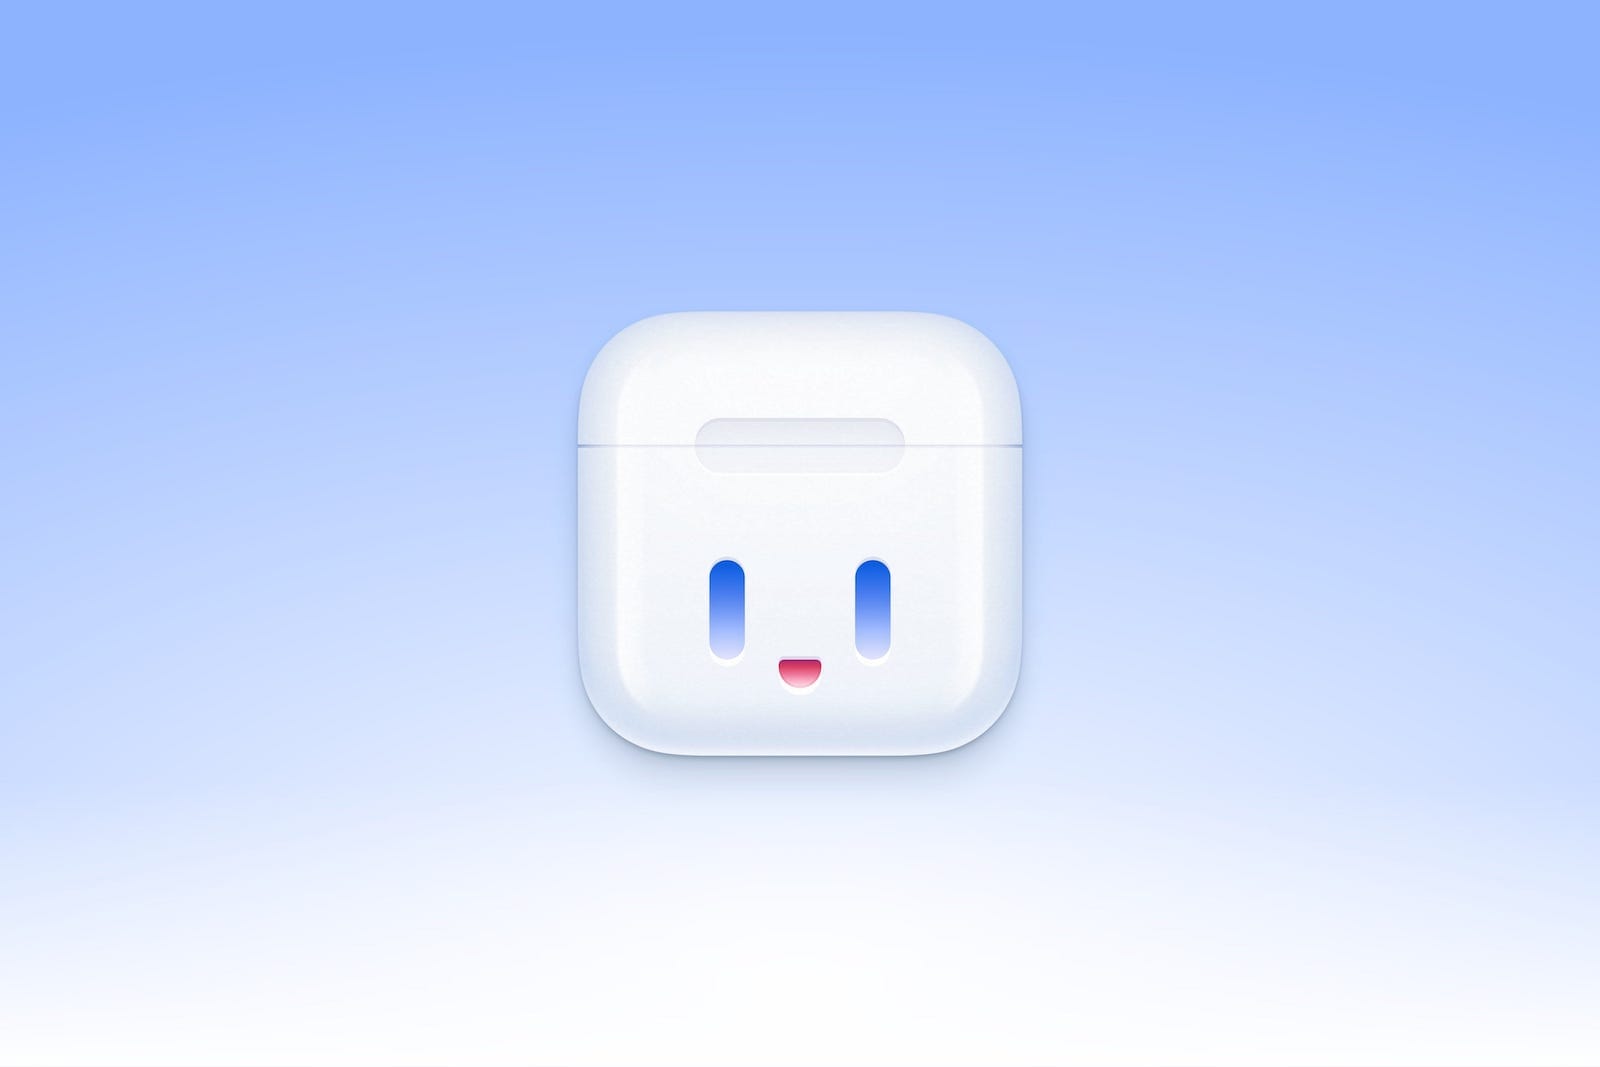 Digital reproduction of an airpods case with a cute happy face to anthropomorphize it.